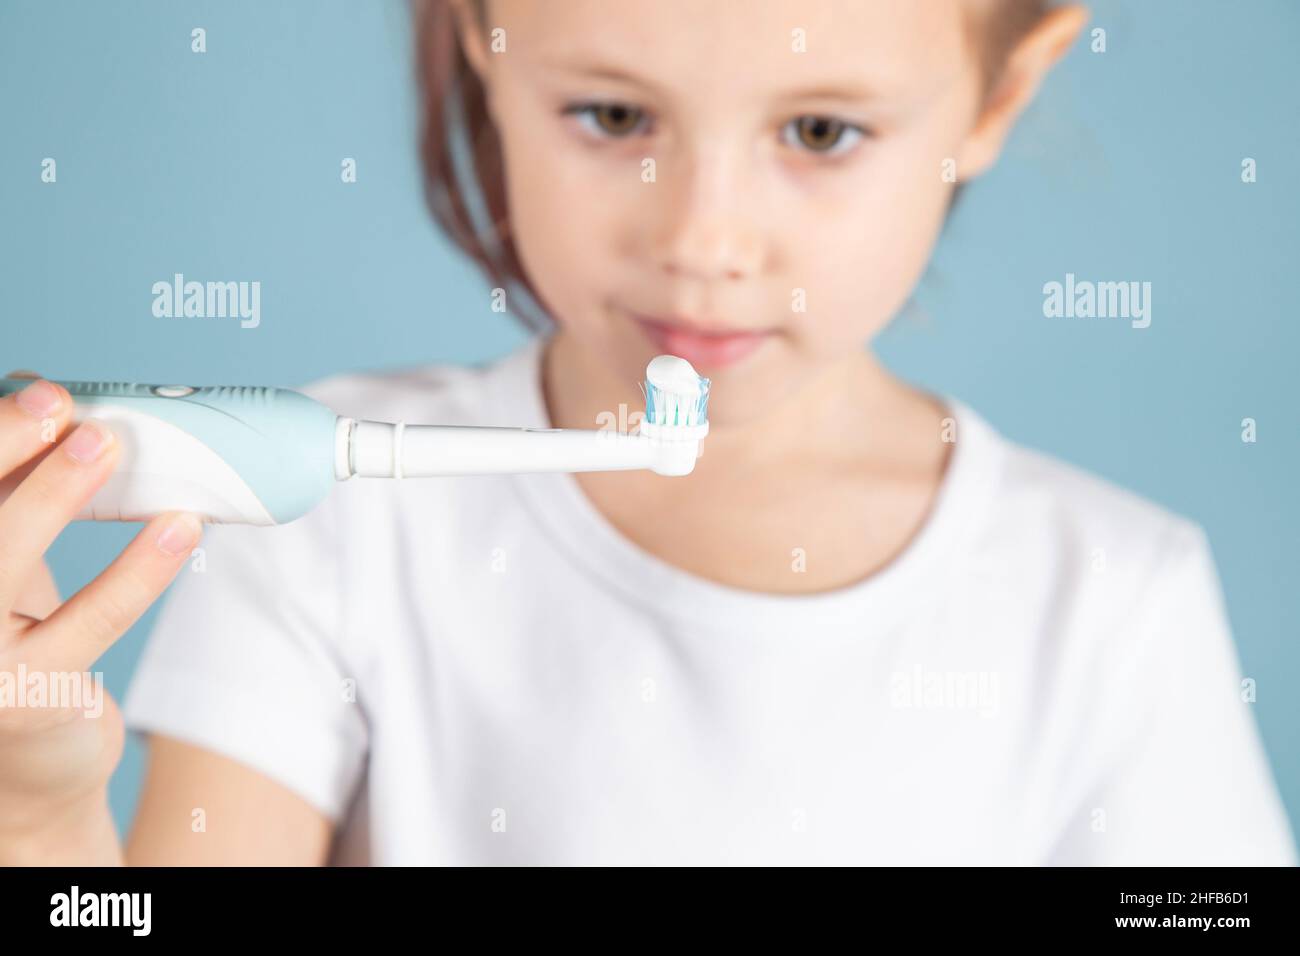 Adorable little caucasian child holding tooth brushStanding Over blue Background, hygiene concept Stock Photo